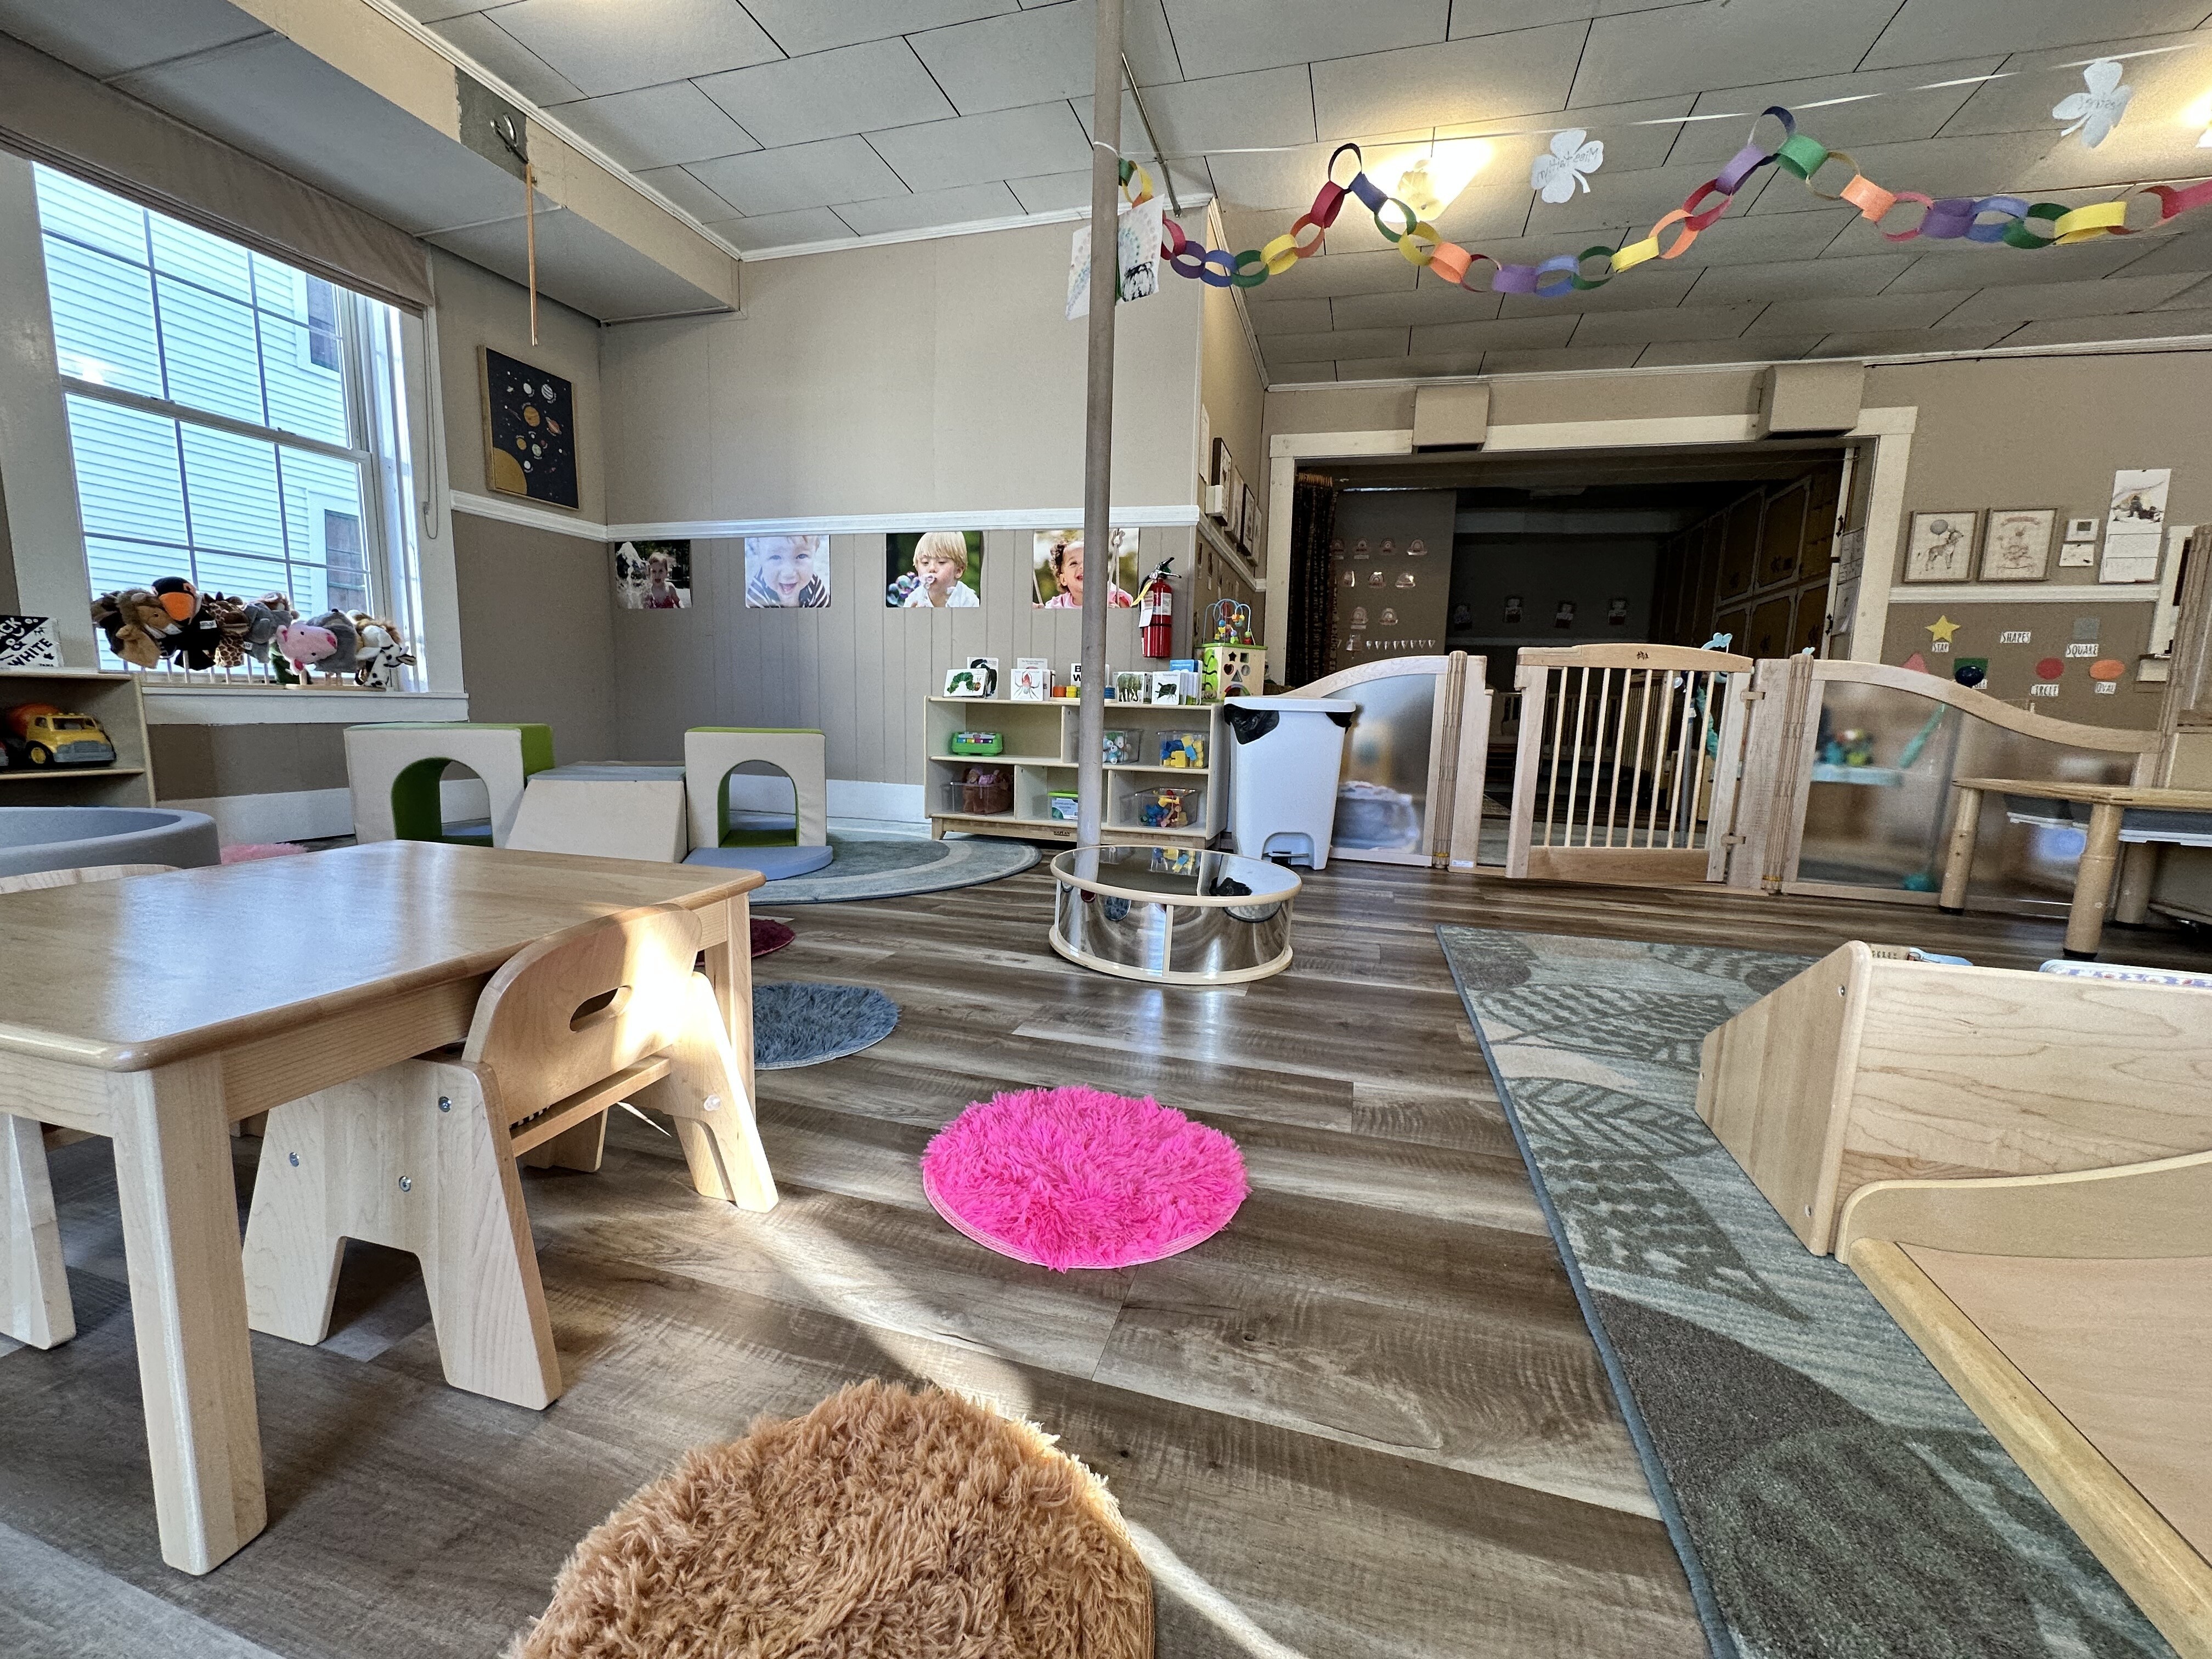 Cabot Children’s Center recently opened in Vermont with Act 76 funding.